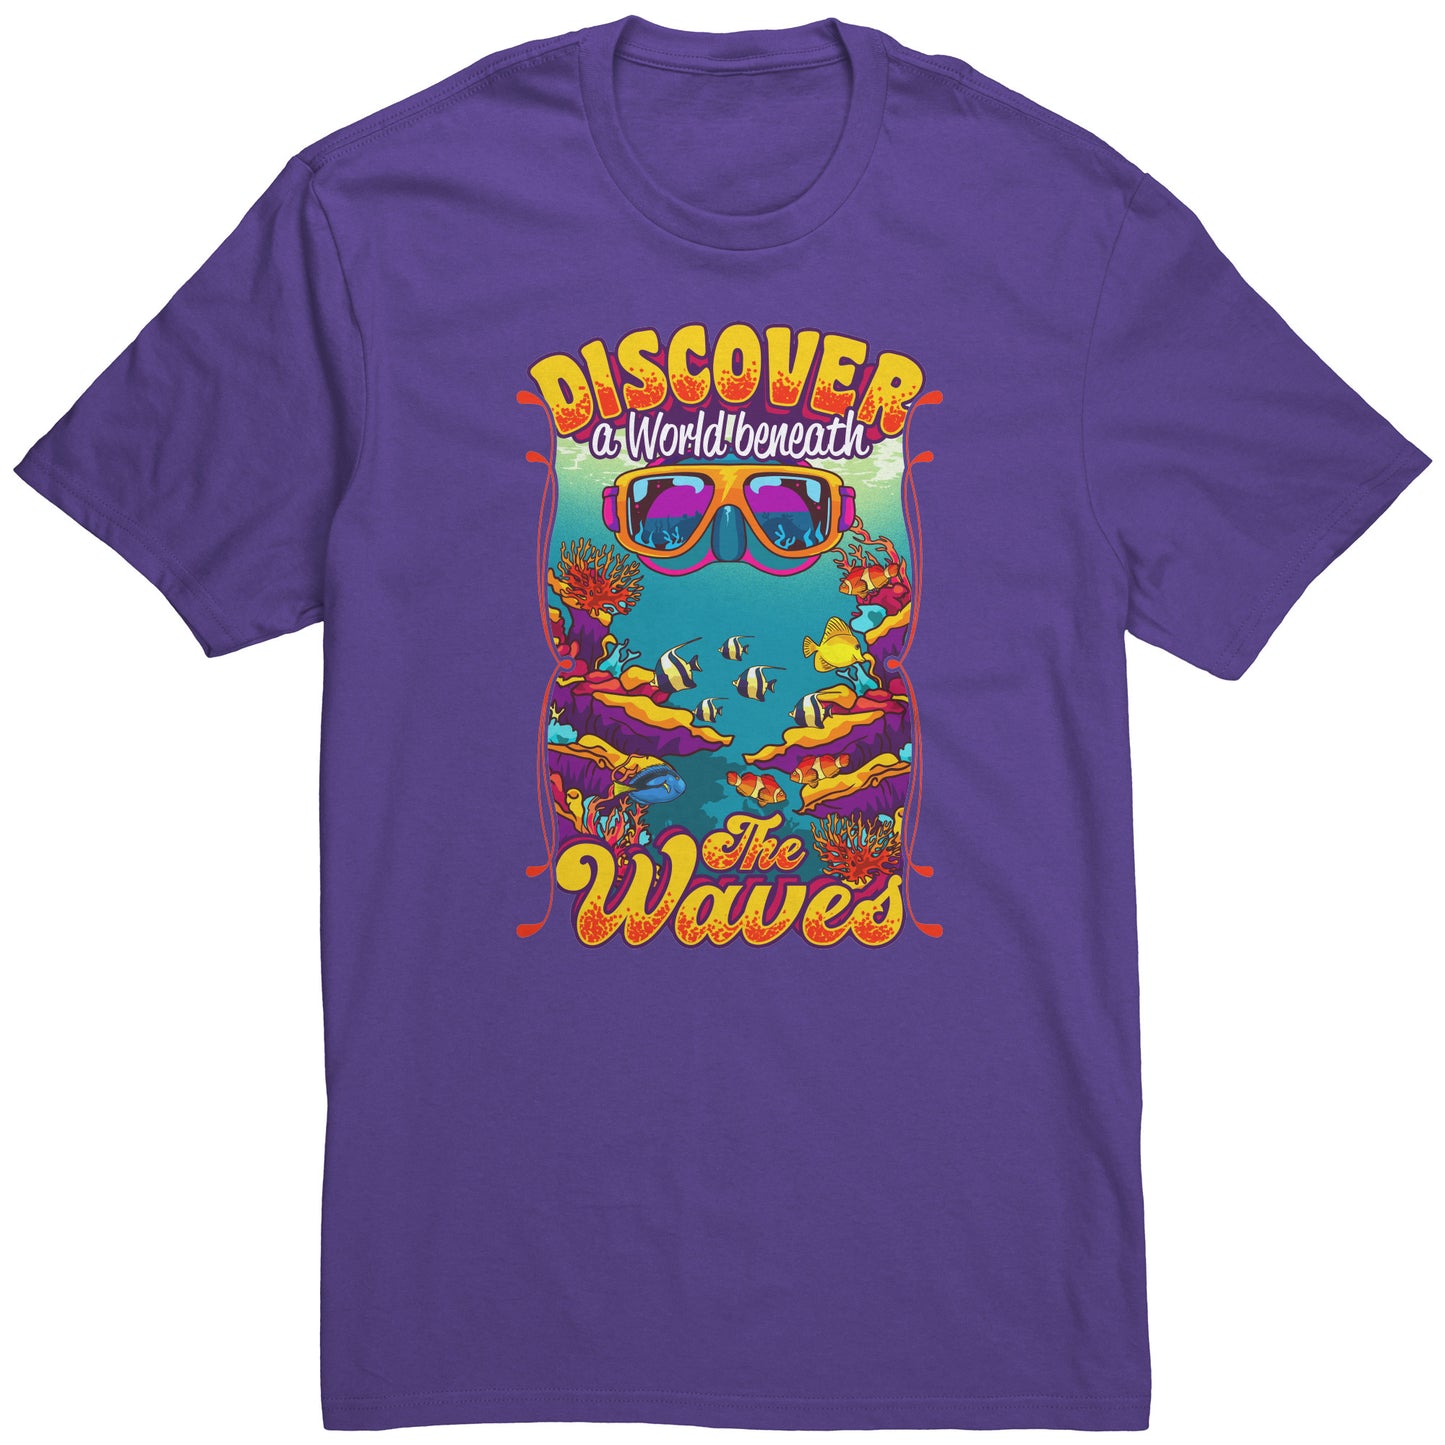 Discover A World Beneath The Waves - Snorkeling Snorkel T-Shirt